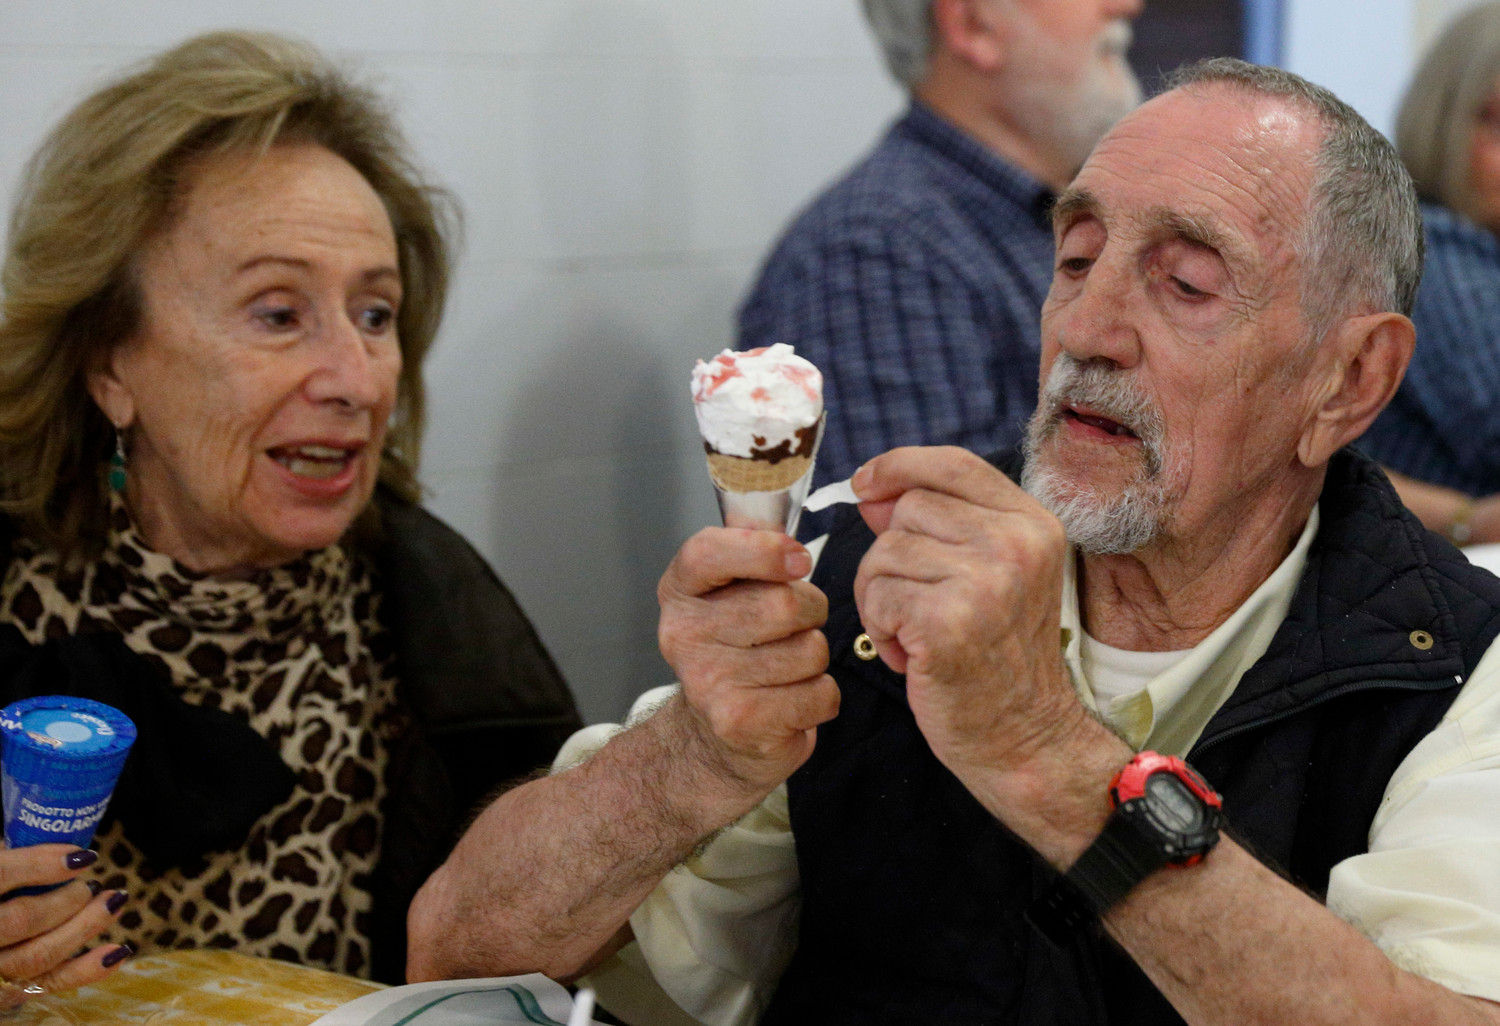 People eat ice cream cones donated by Pope Francis at a Sant’Egidio soup kitchen in Rome April 23. In honor of his name day, the feast of St. George, the Pope donated 3,000 servings of ice cream to soup kitchens and homeless shelters around Rome.